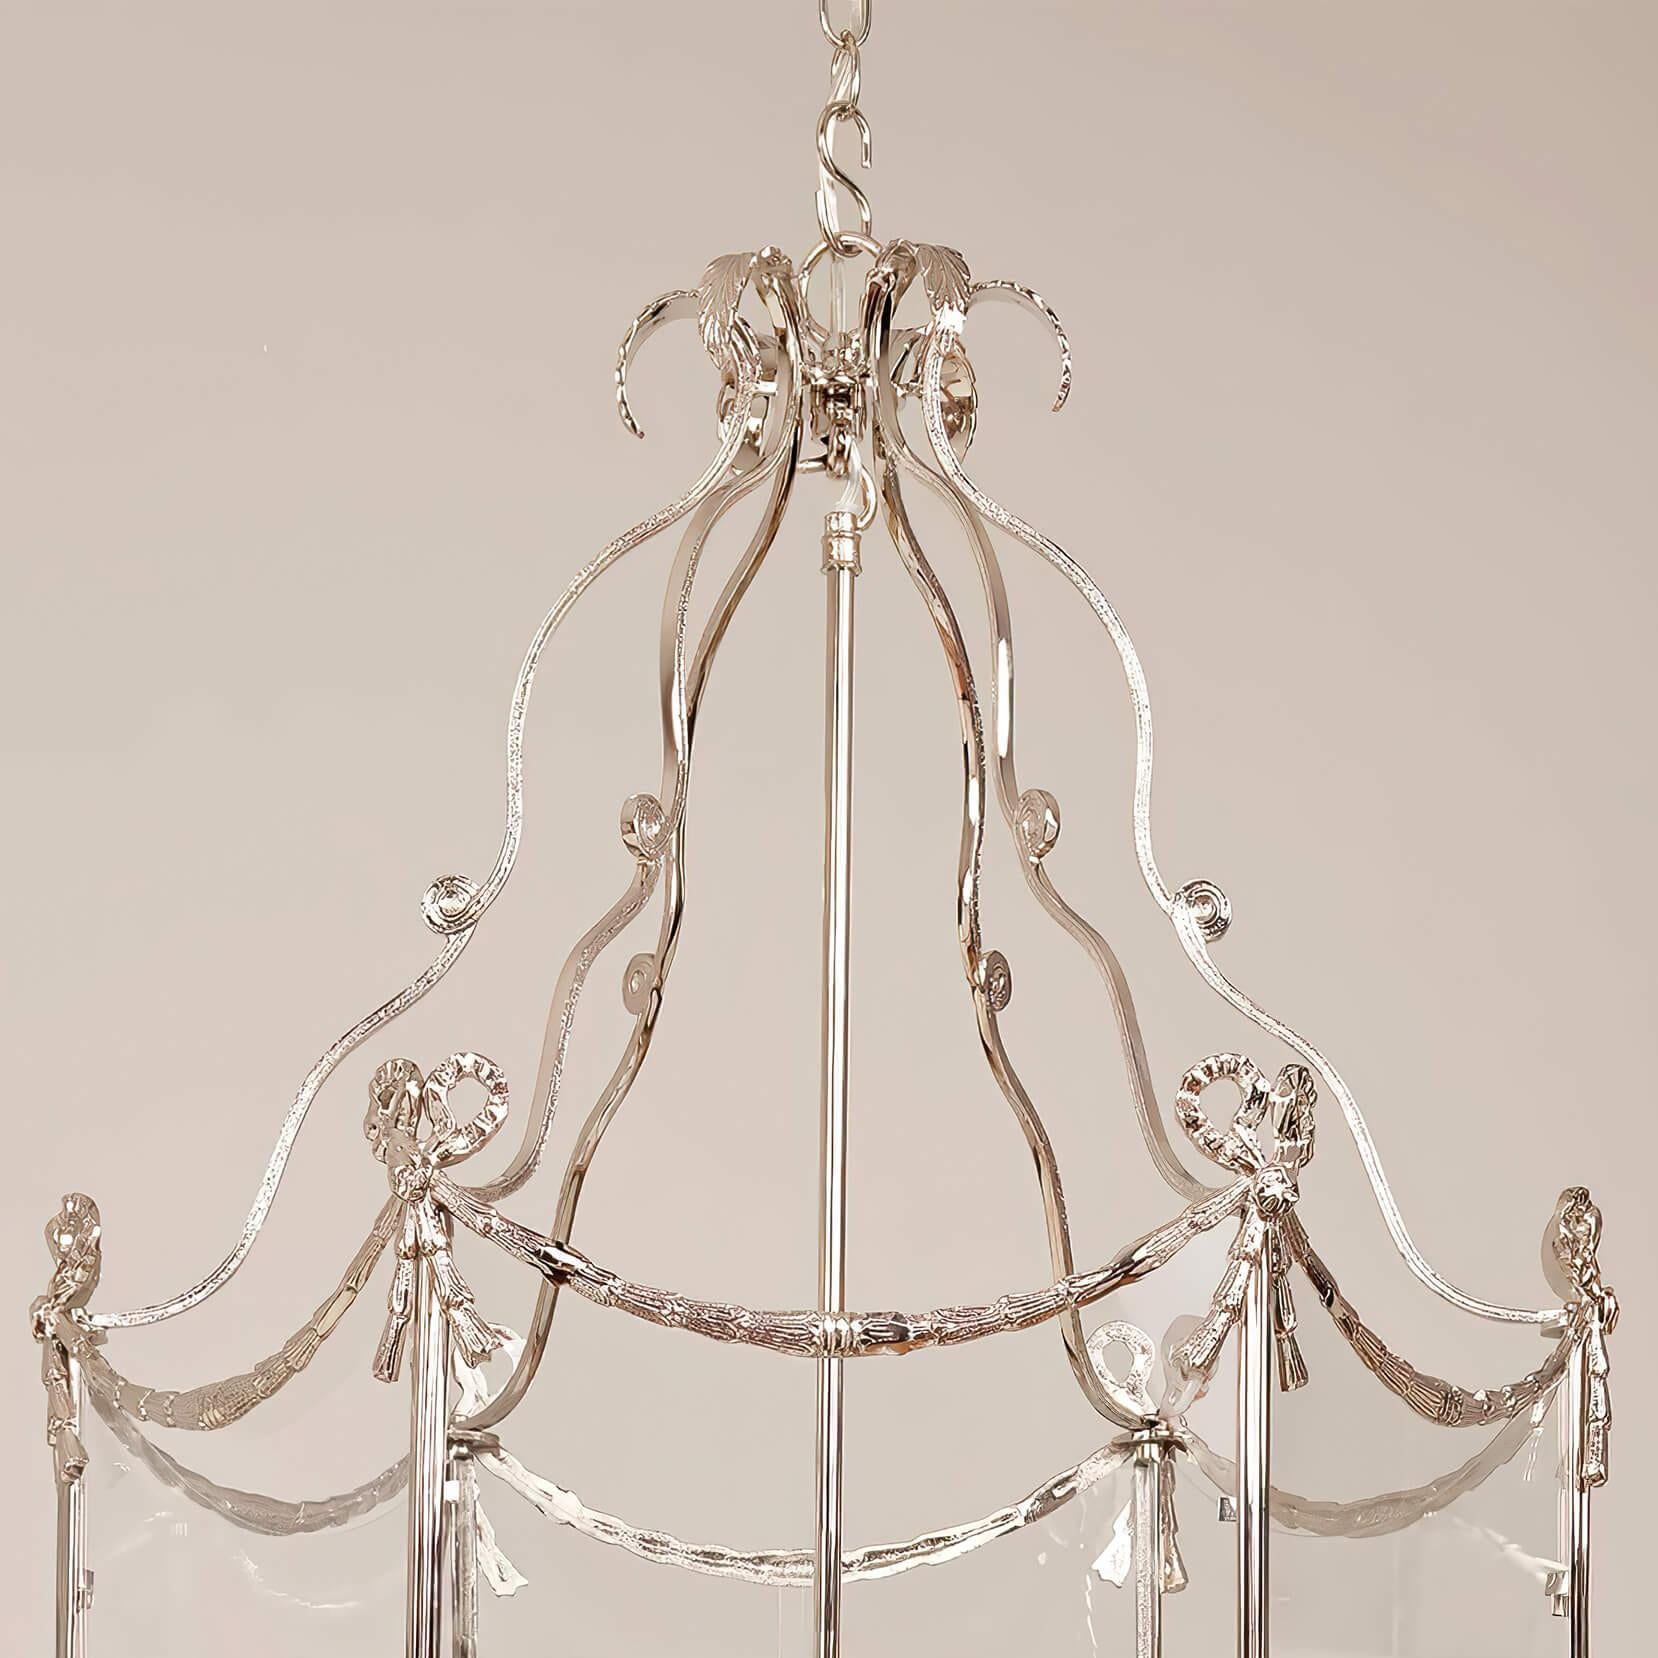 A large Swedish neoclassic style five-light brass hall lantern with 18th-century style embellishments. The leaf tip crown above scrolling supports and a hexagonal frame decorated with bowknots, tassels, and bellflower swags. The base is decorated